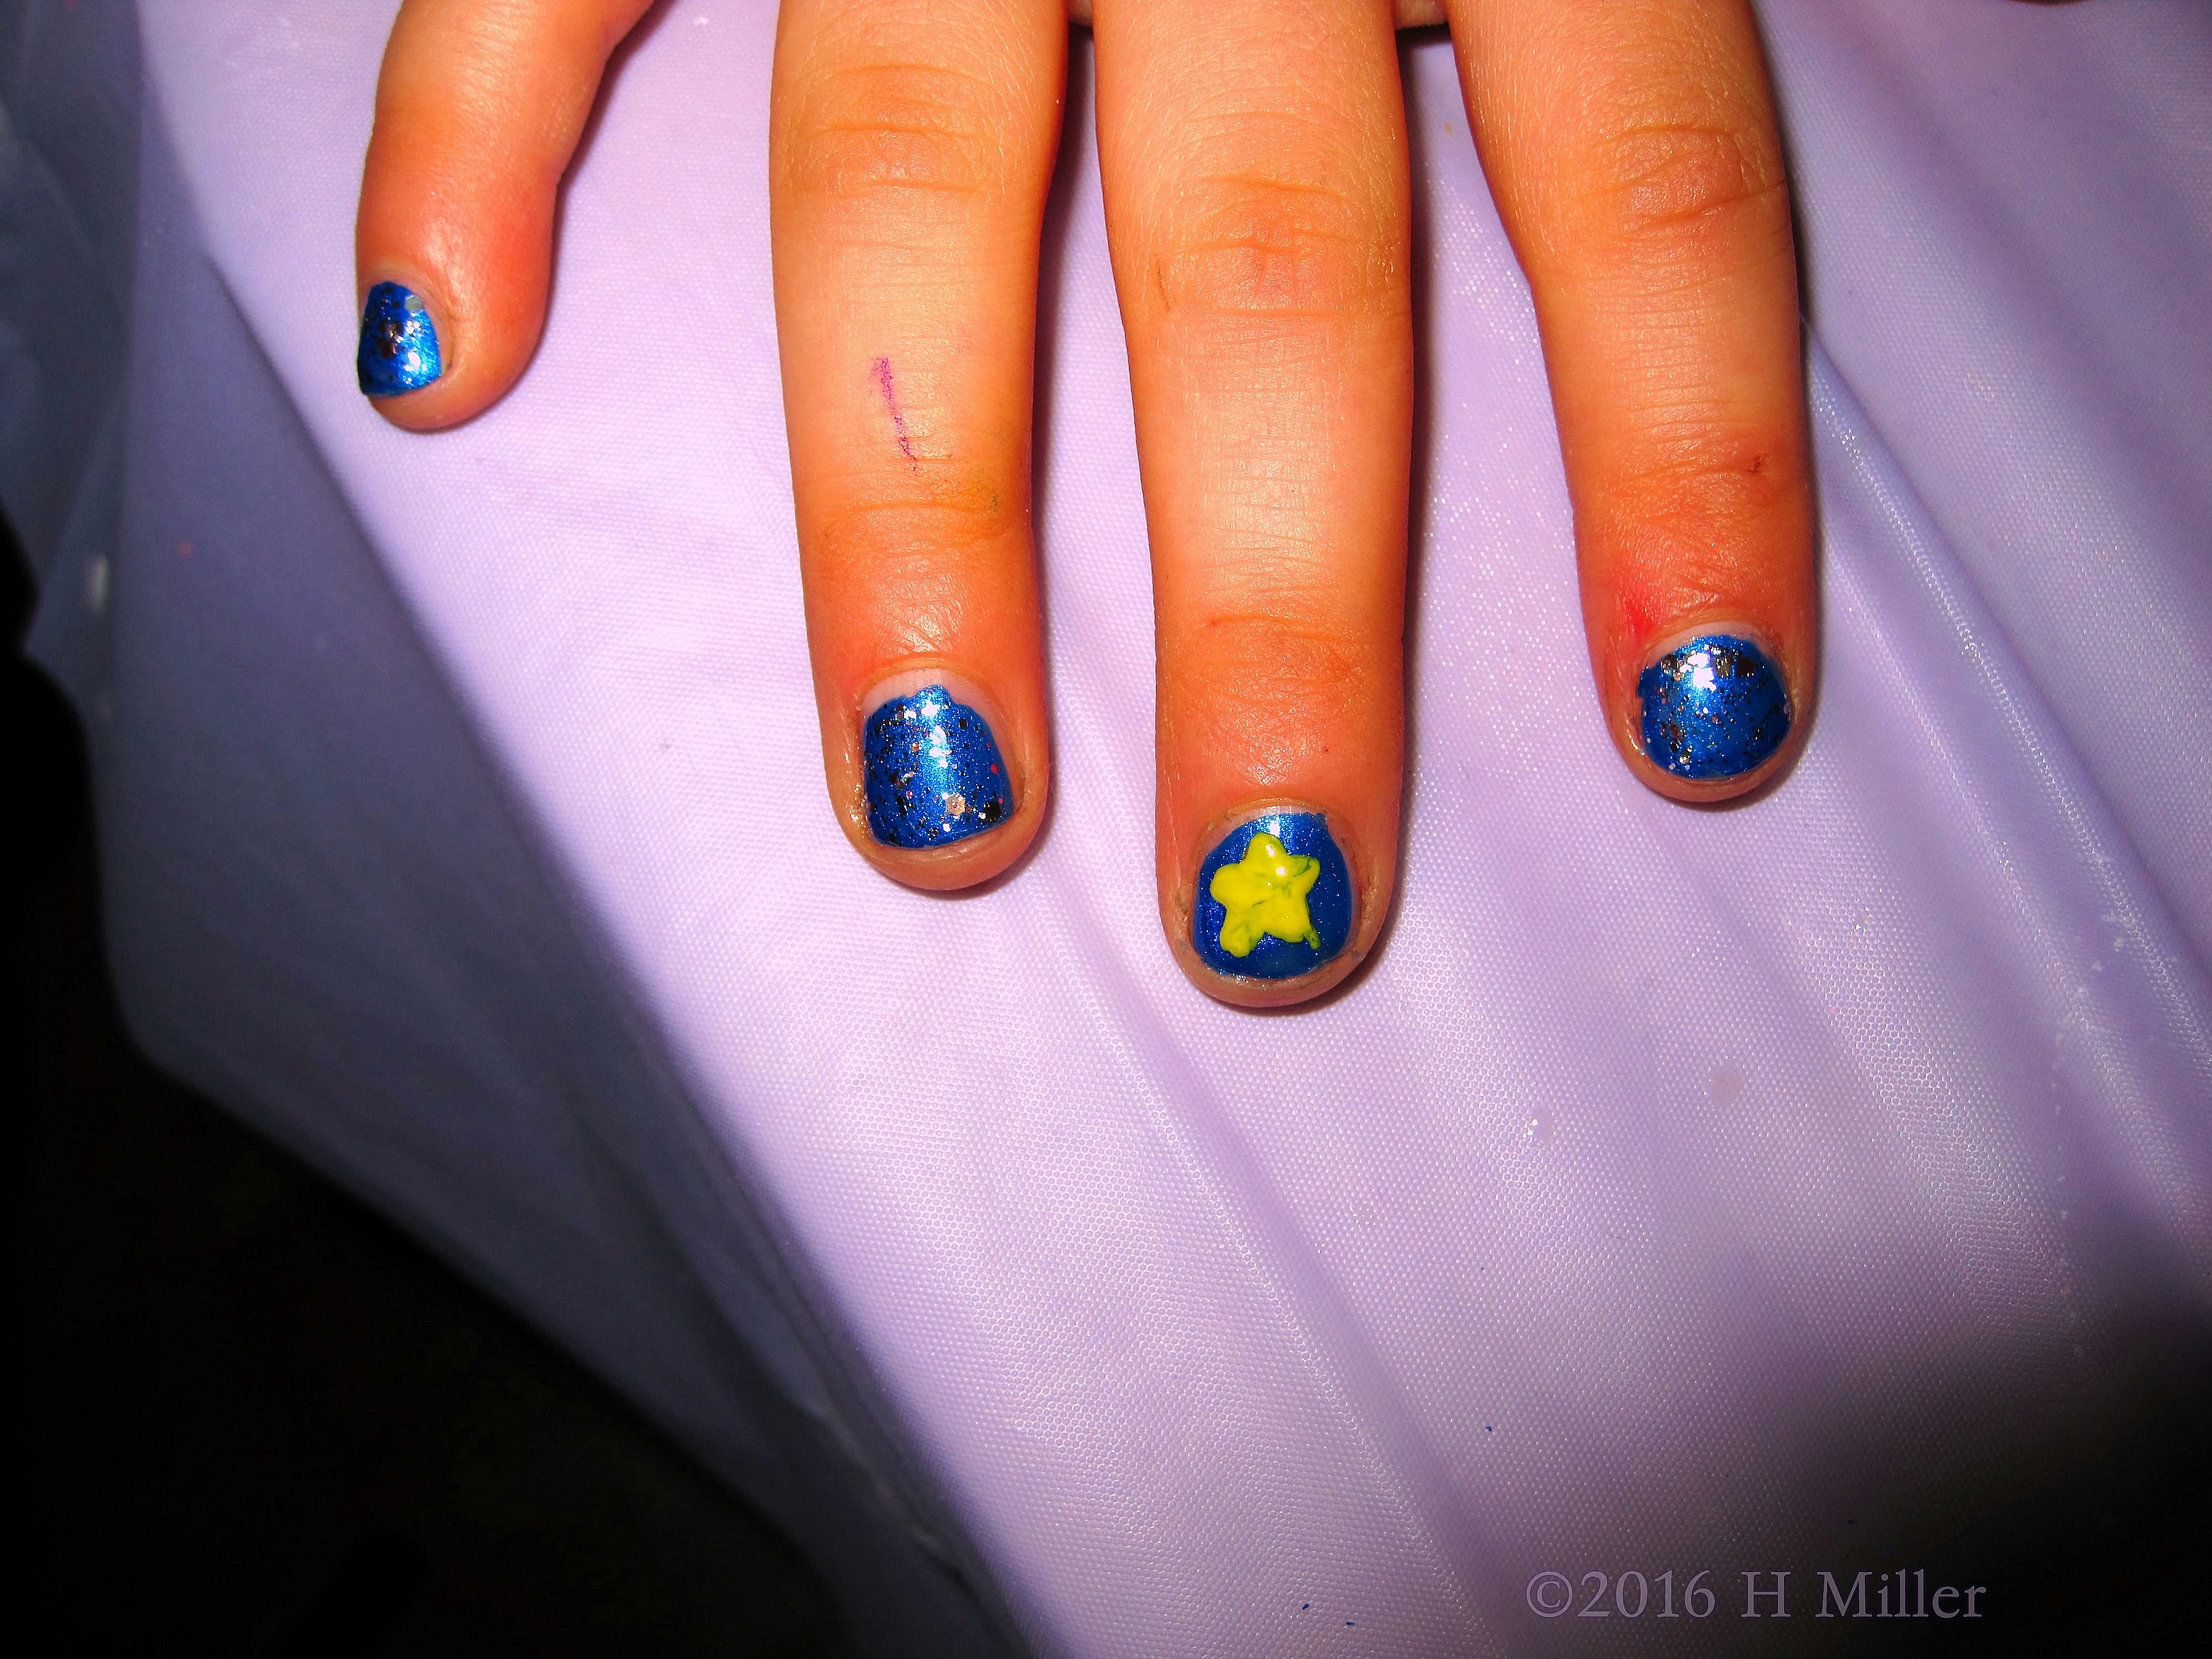 Buttercup And Blue Manicure With A Star Nail Art!